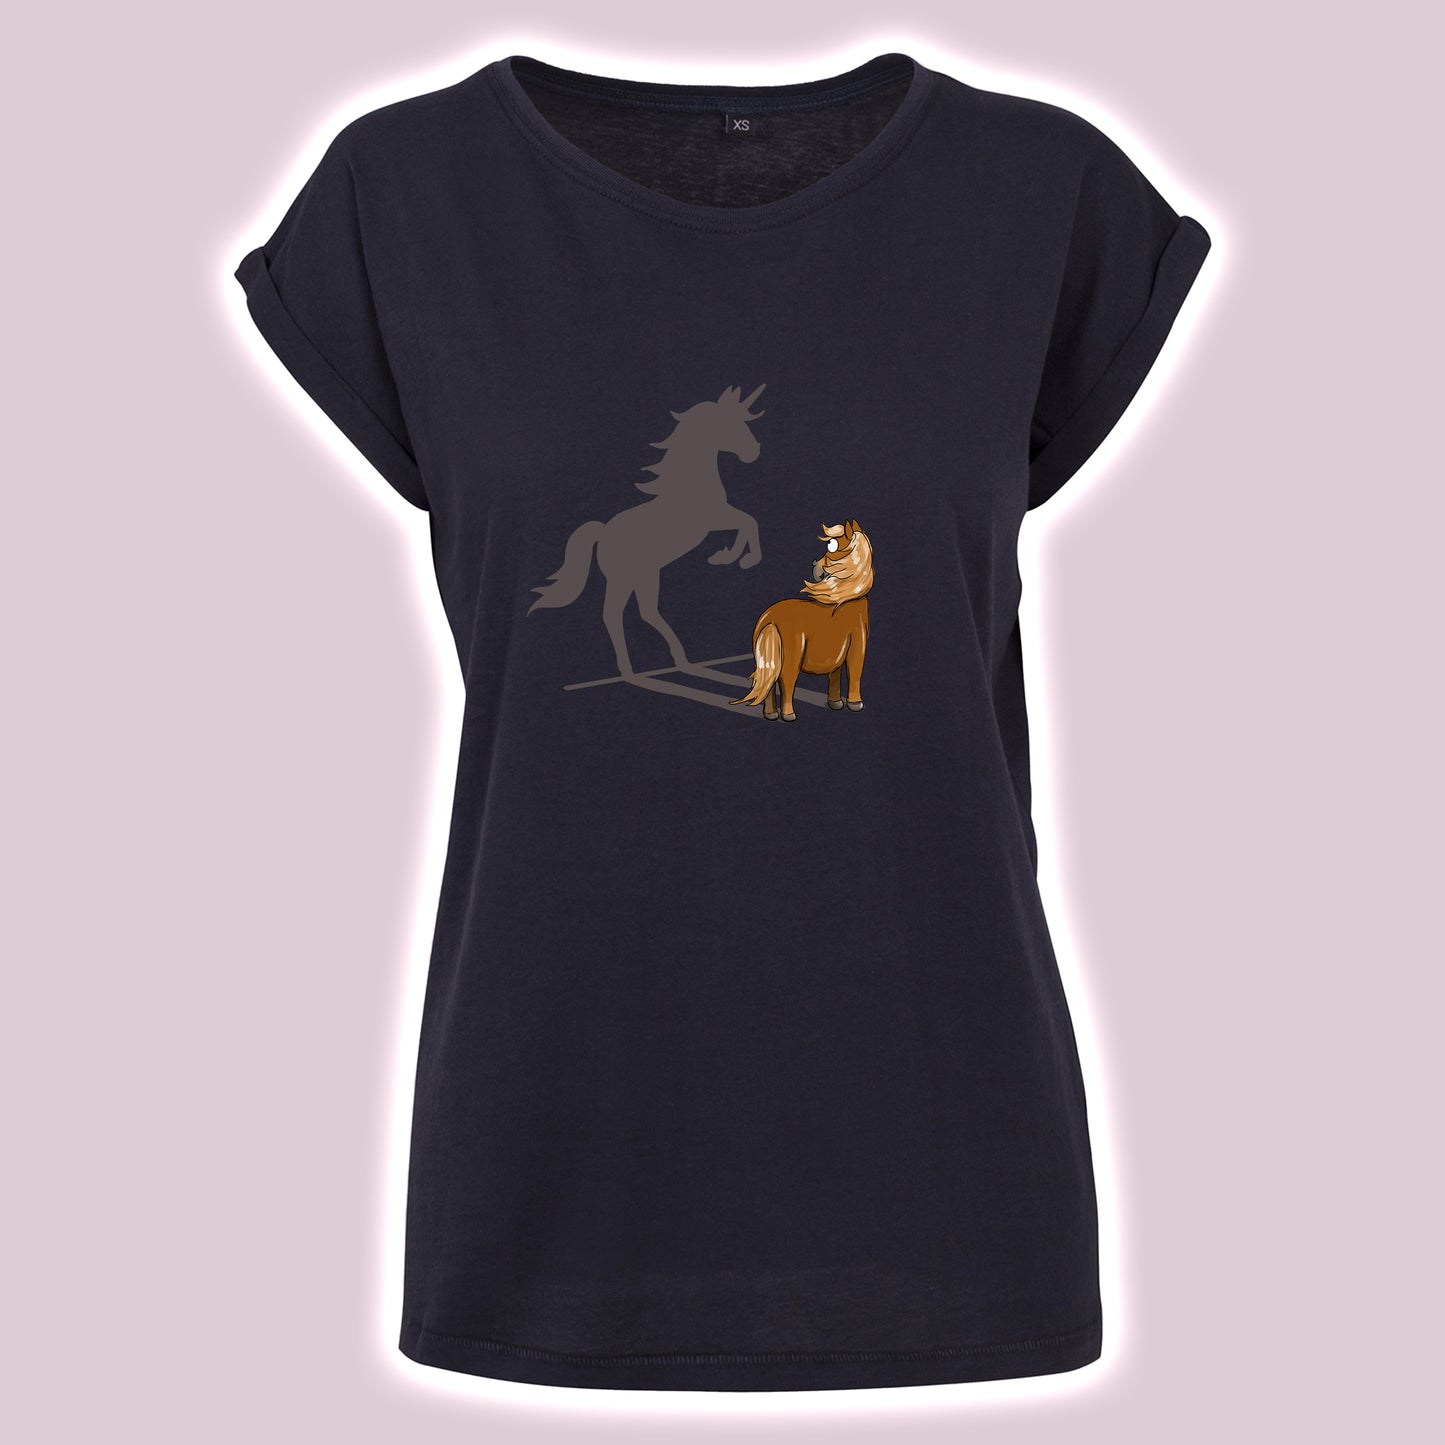 Equiboodle Emily Cole Hotshot T Shirt - Believe In Yourself - Flaxen Chestnut